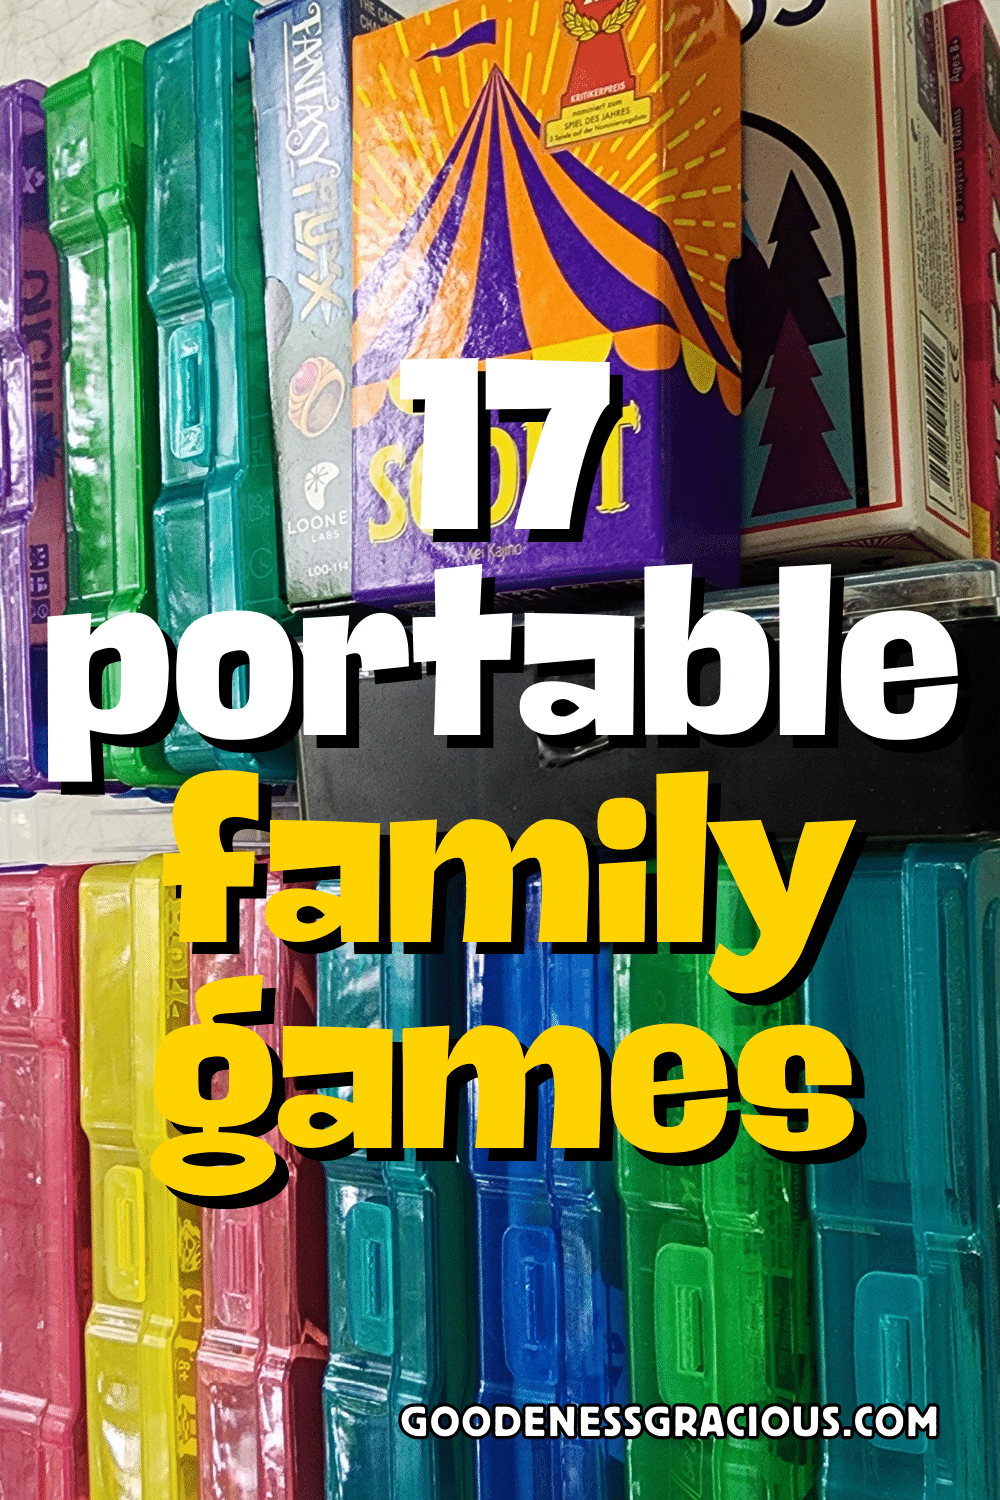 17 Portable Family Games that pack a lot of fun in a small box. These tried and true games are family tested and approved. via @crisgoode